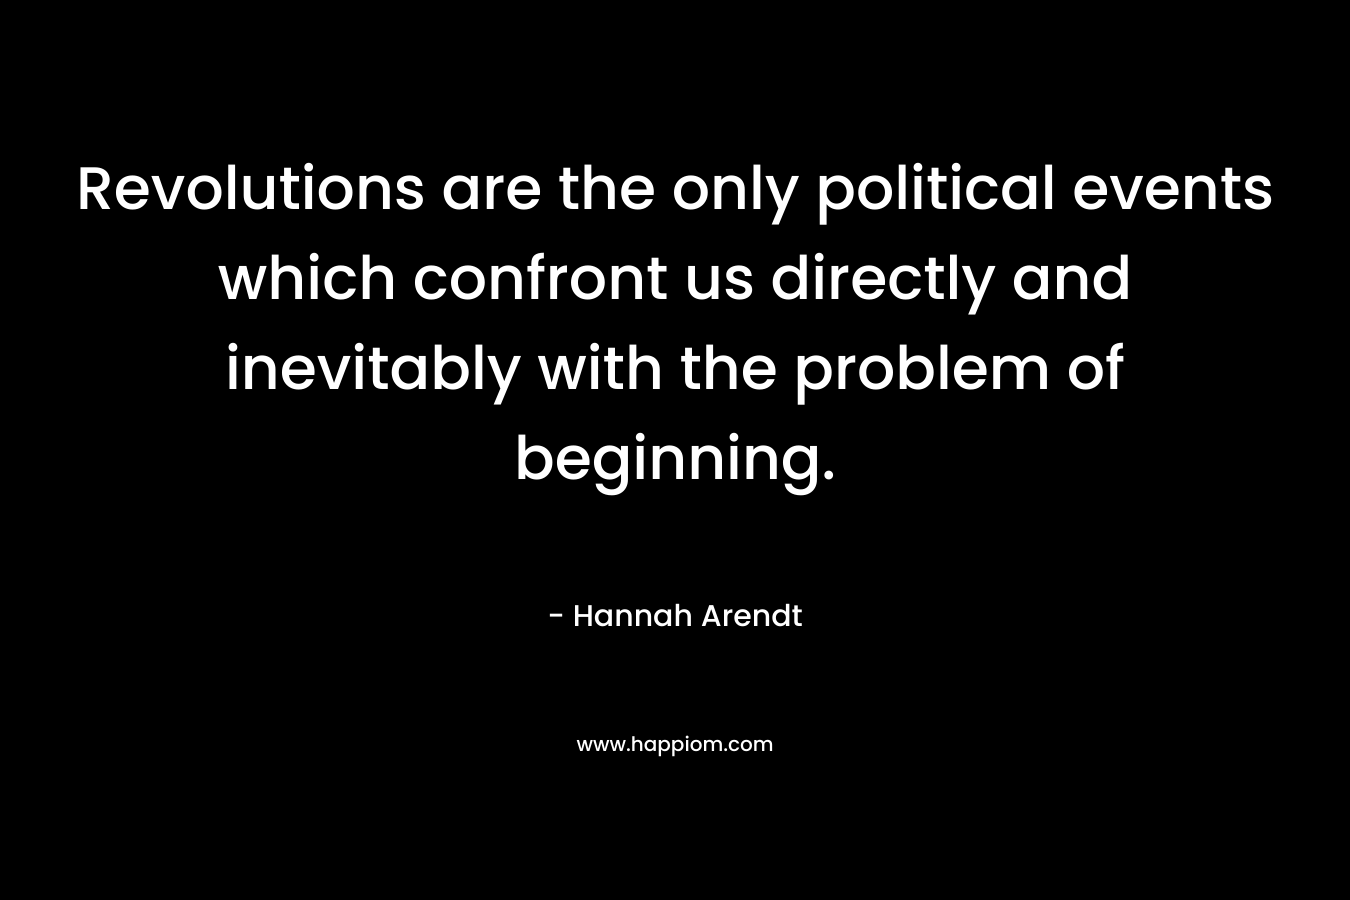 Revolutions are the only political events which confront us directly and inevitably with the problem of beginning. – Hannah Arendt